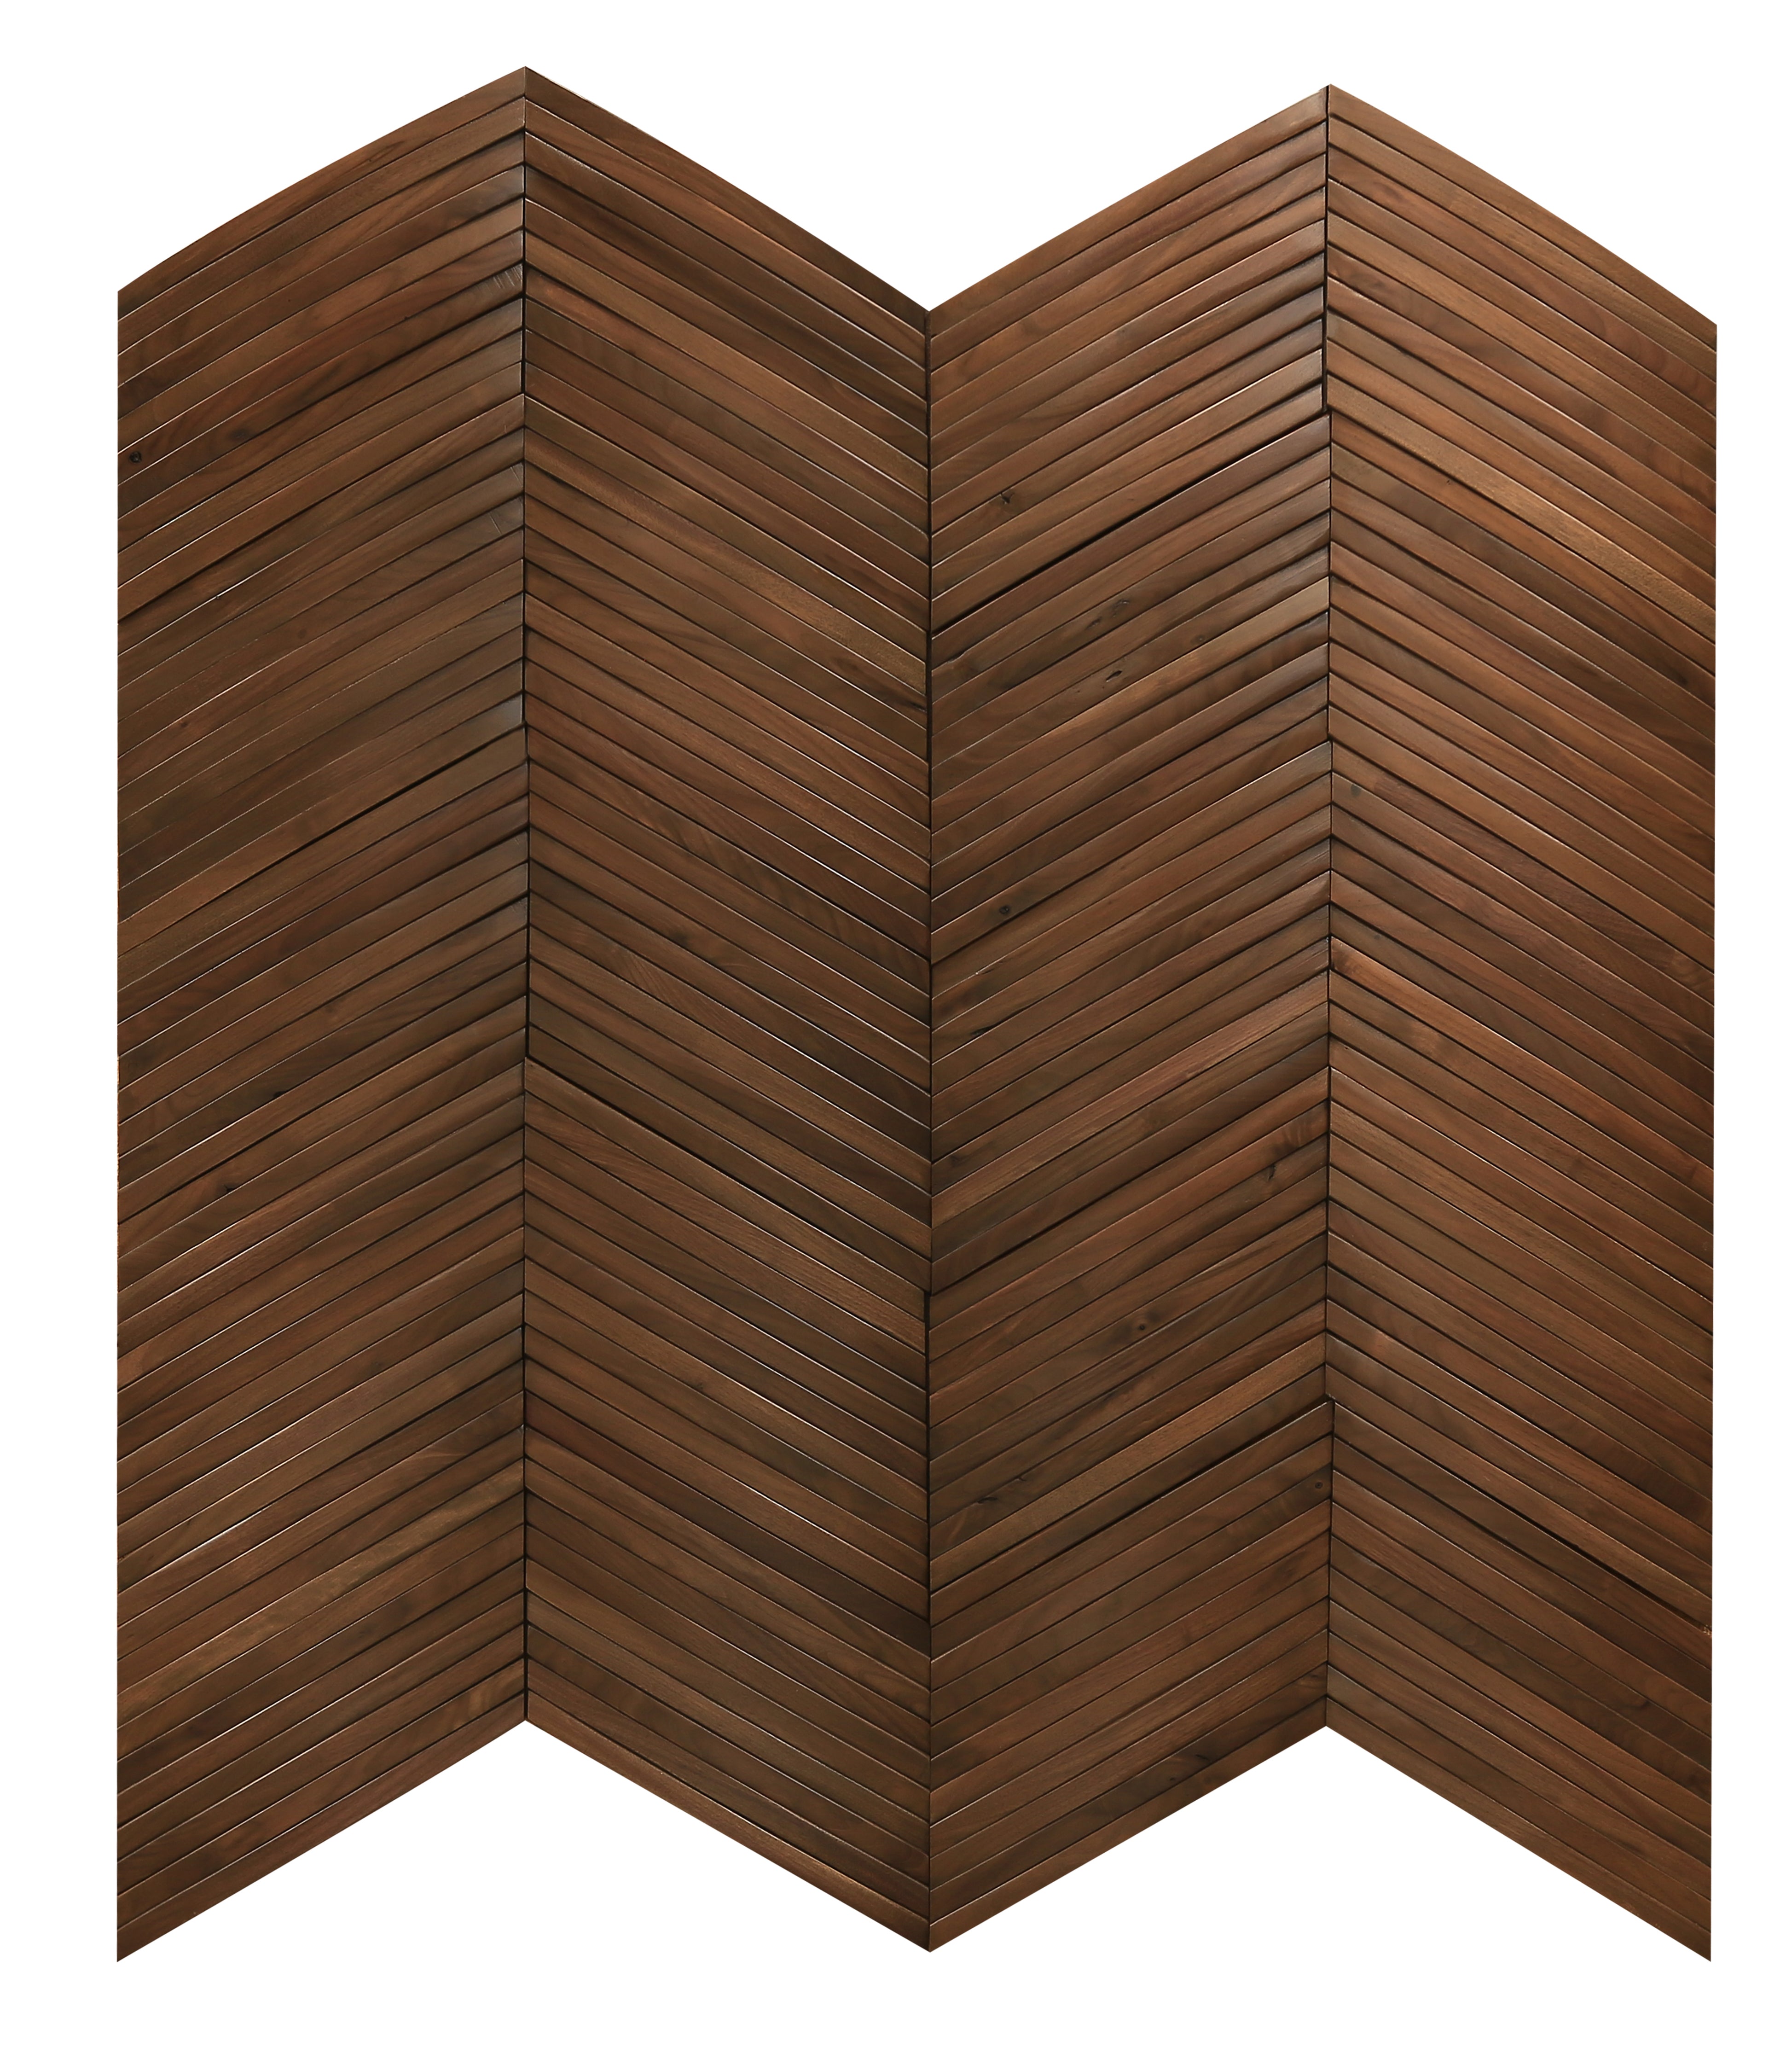 duchateau inceptiv ark chevron stout walnut three dimensional wall natural wood panel conversion varnish for interior use distributed by surface group international